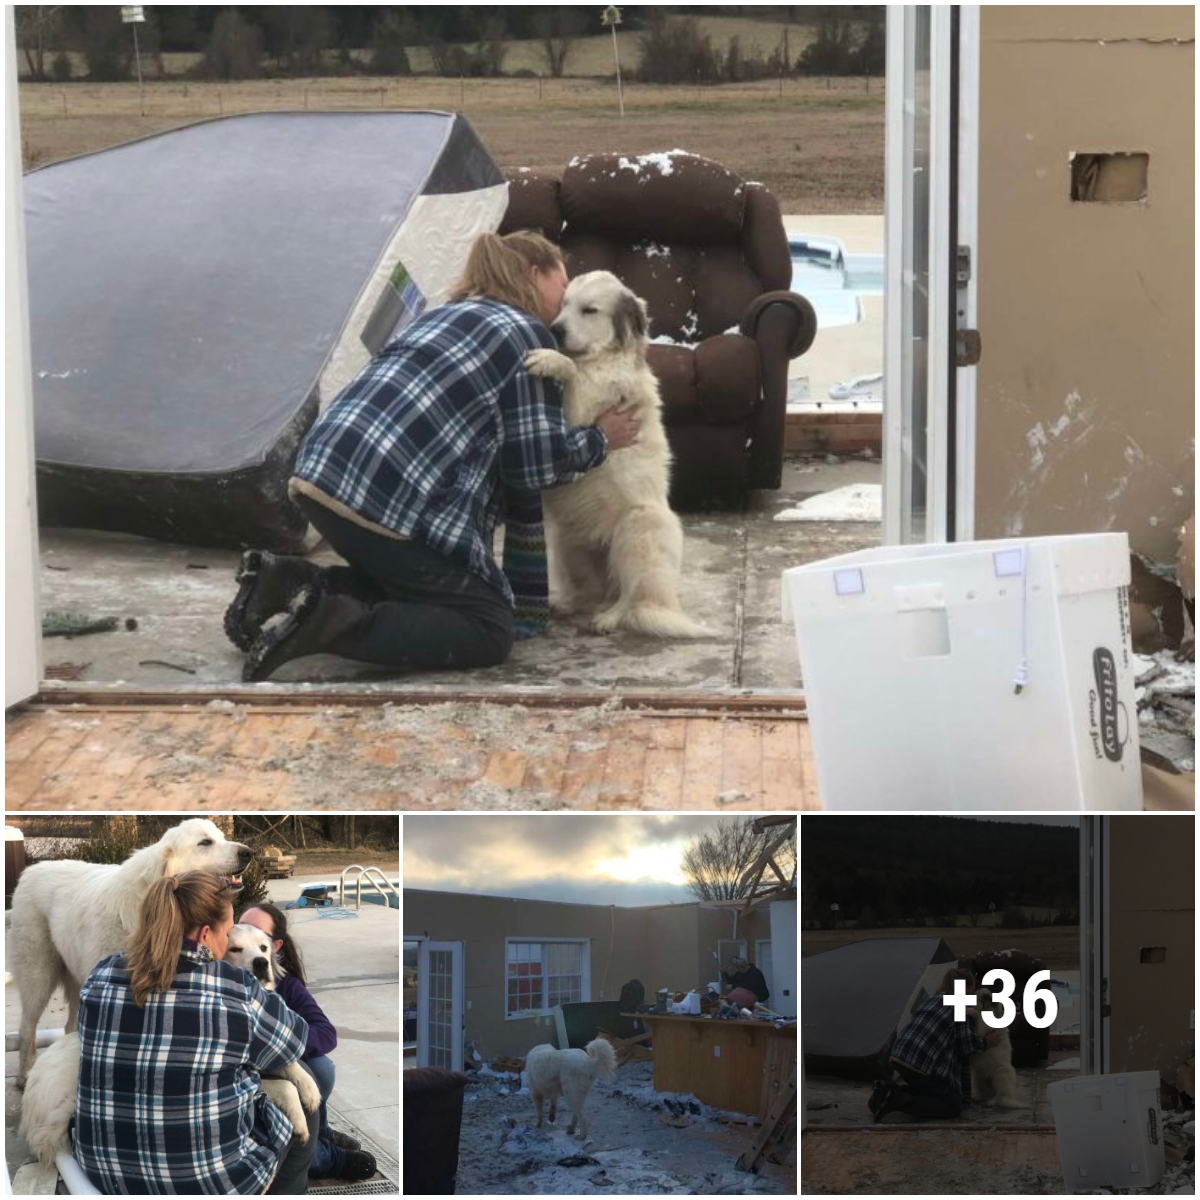 Reunion after the tornado: The touching reunion of a dog with his mother after a terrible tornado